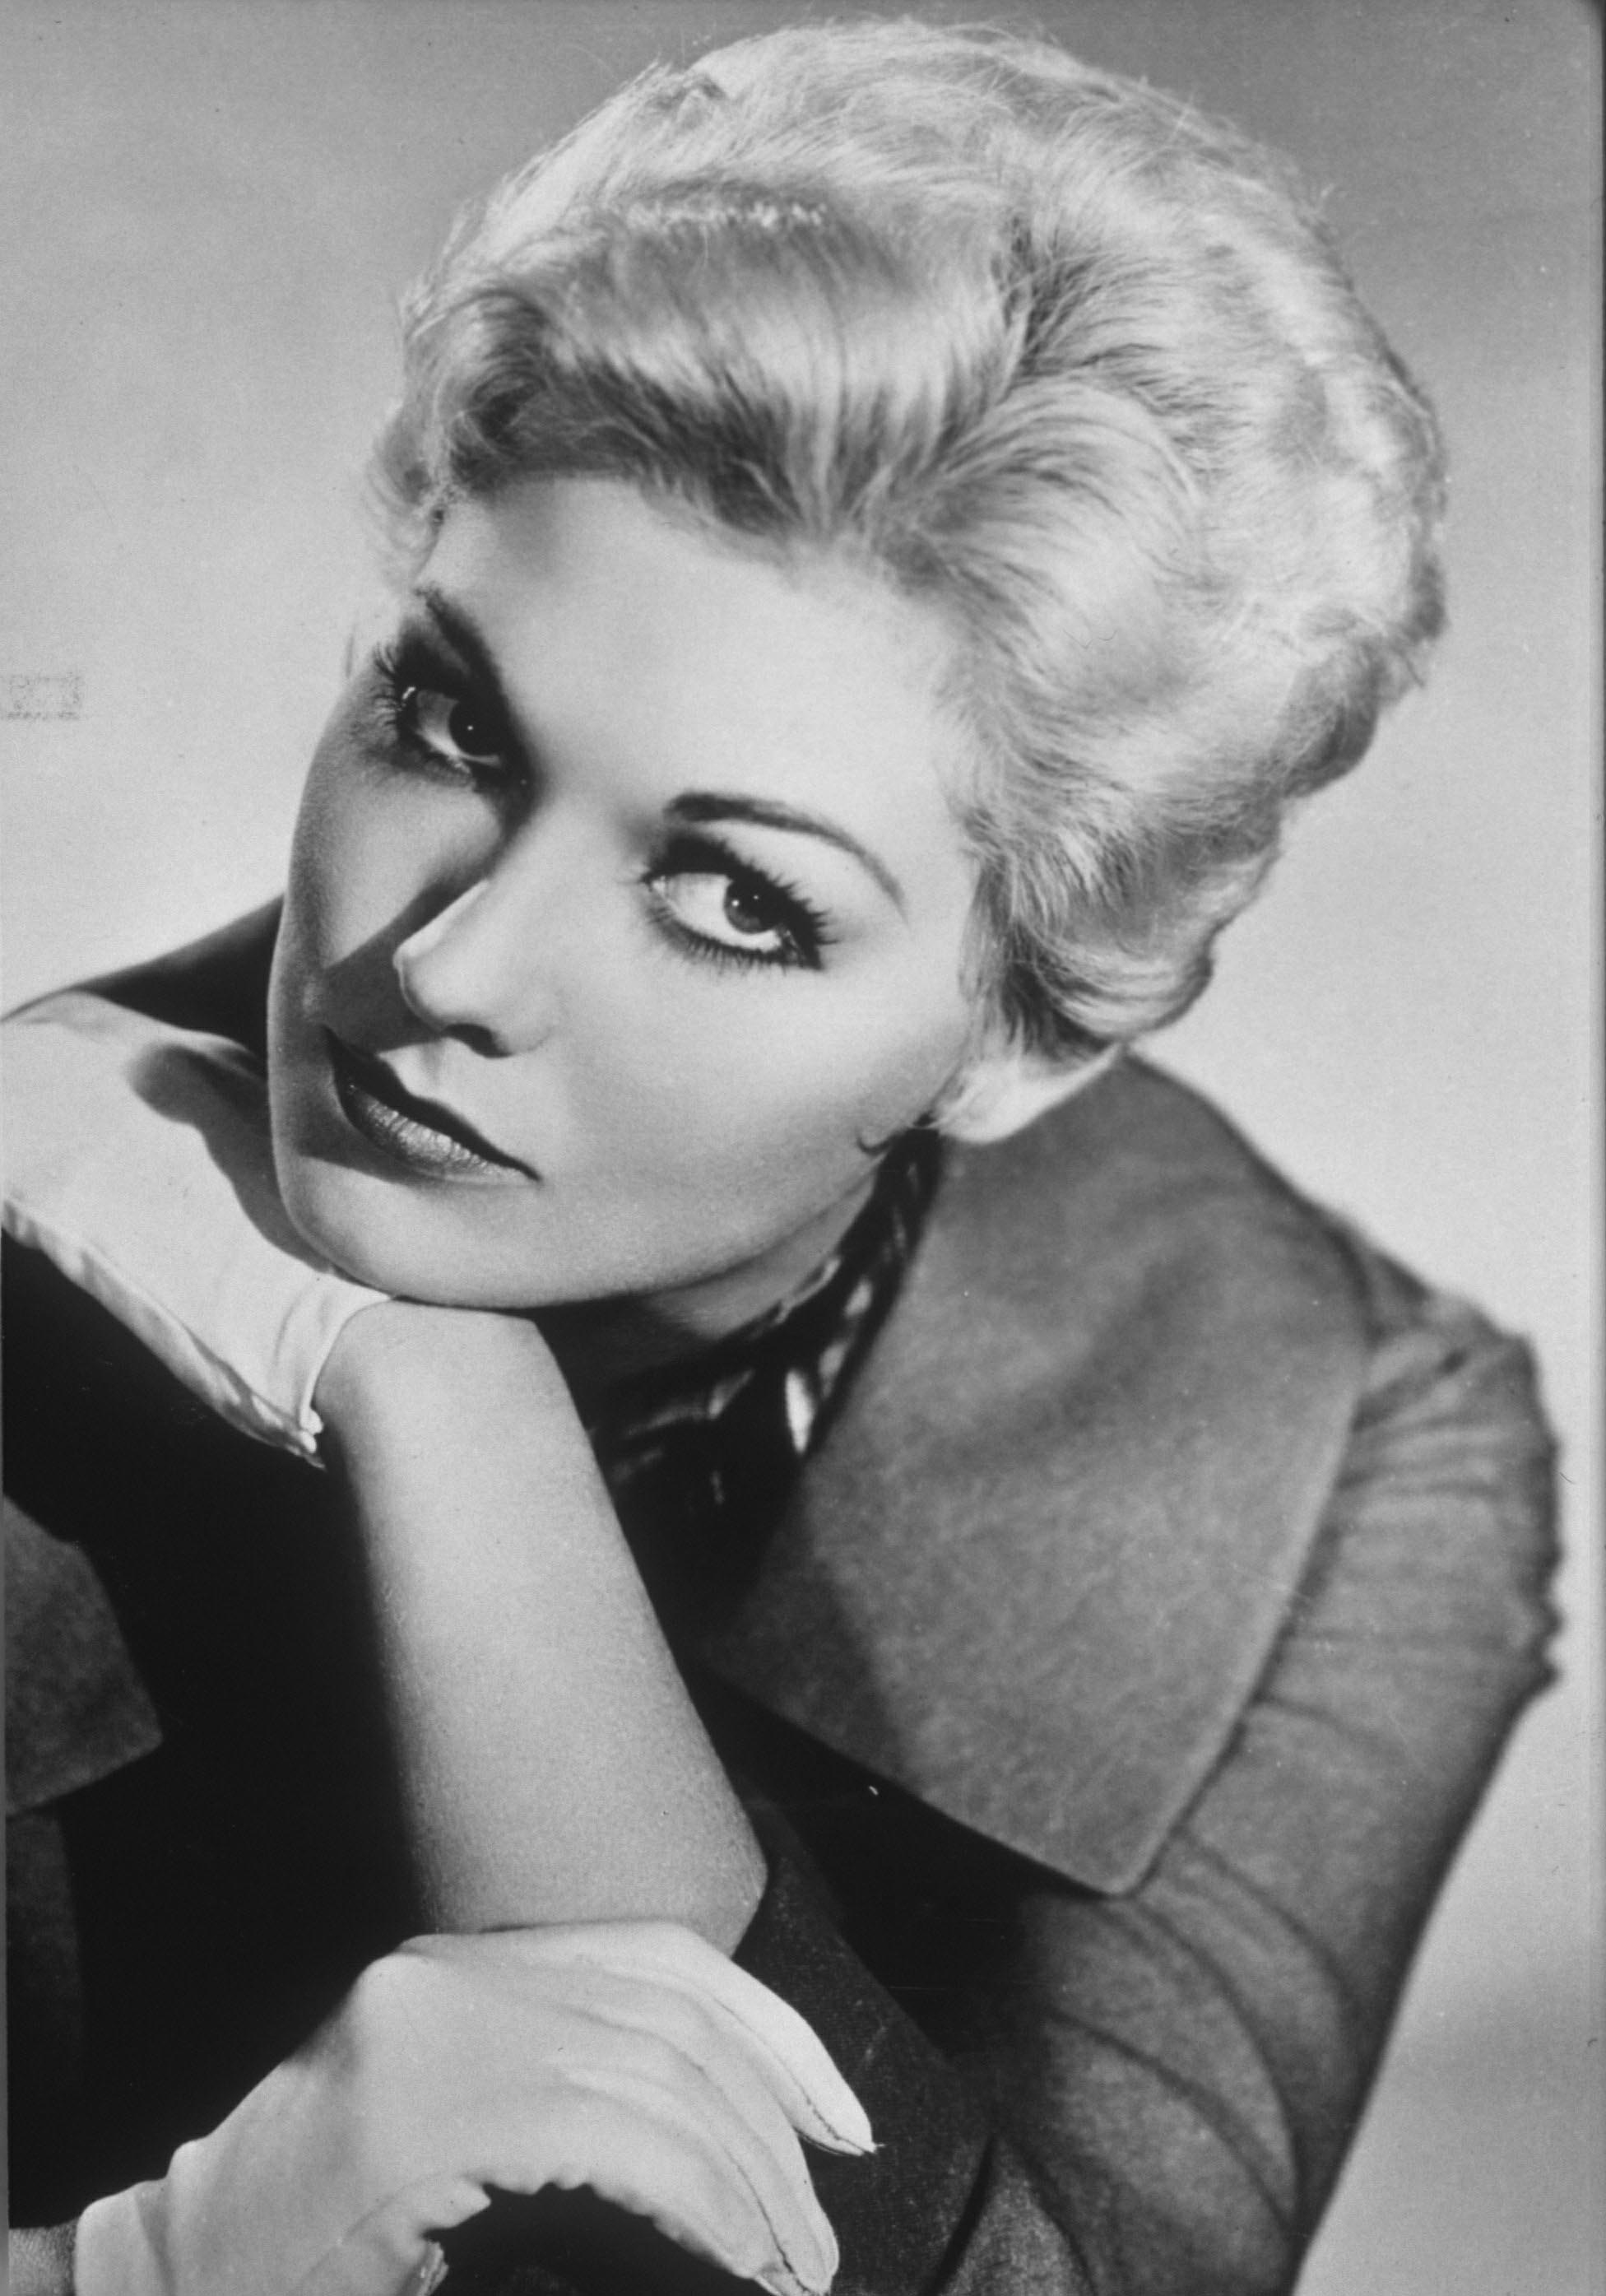 <p>Kim Novak -- who's pictured in an undated photo from early in her career -- was a teen beauty queen and a Hollywood starlet before the age of 20. She eventually achieved sex symbol status thanks to iconic roles in films like "Vertigo." But if we hadn't told you who she was, would you recognize her today?</p>